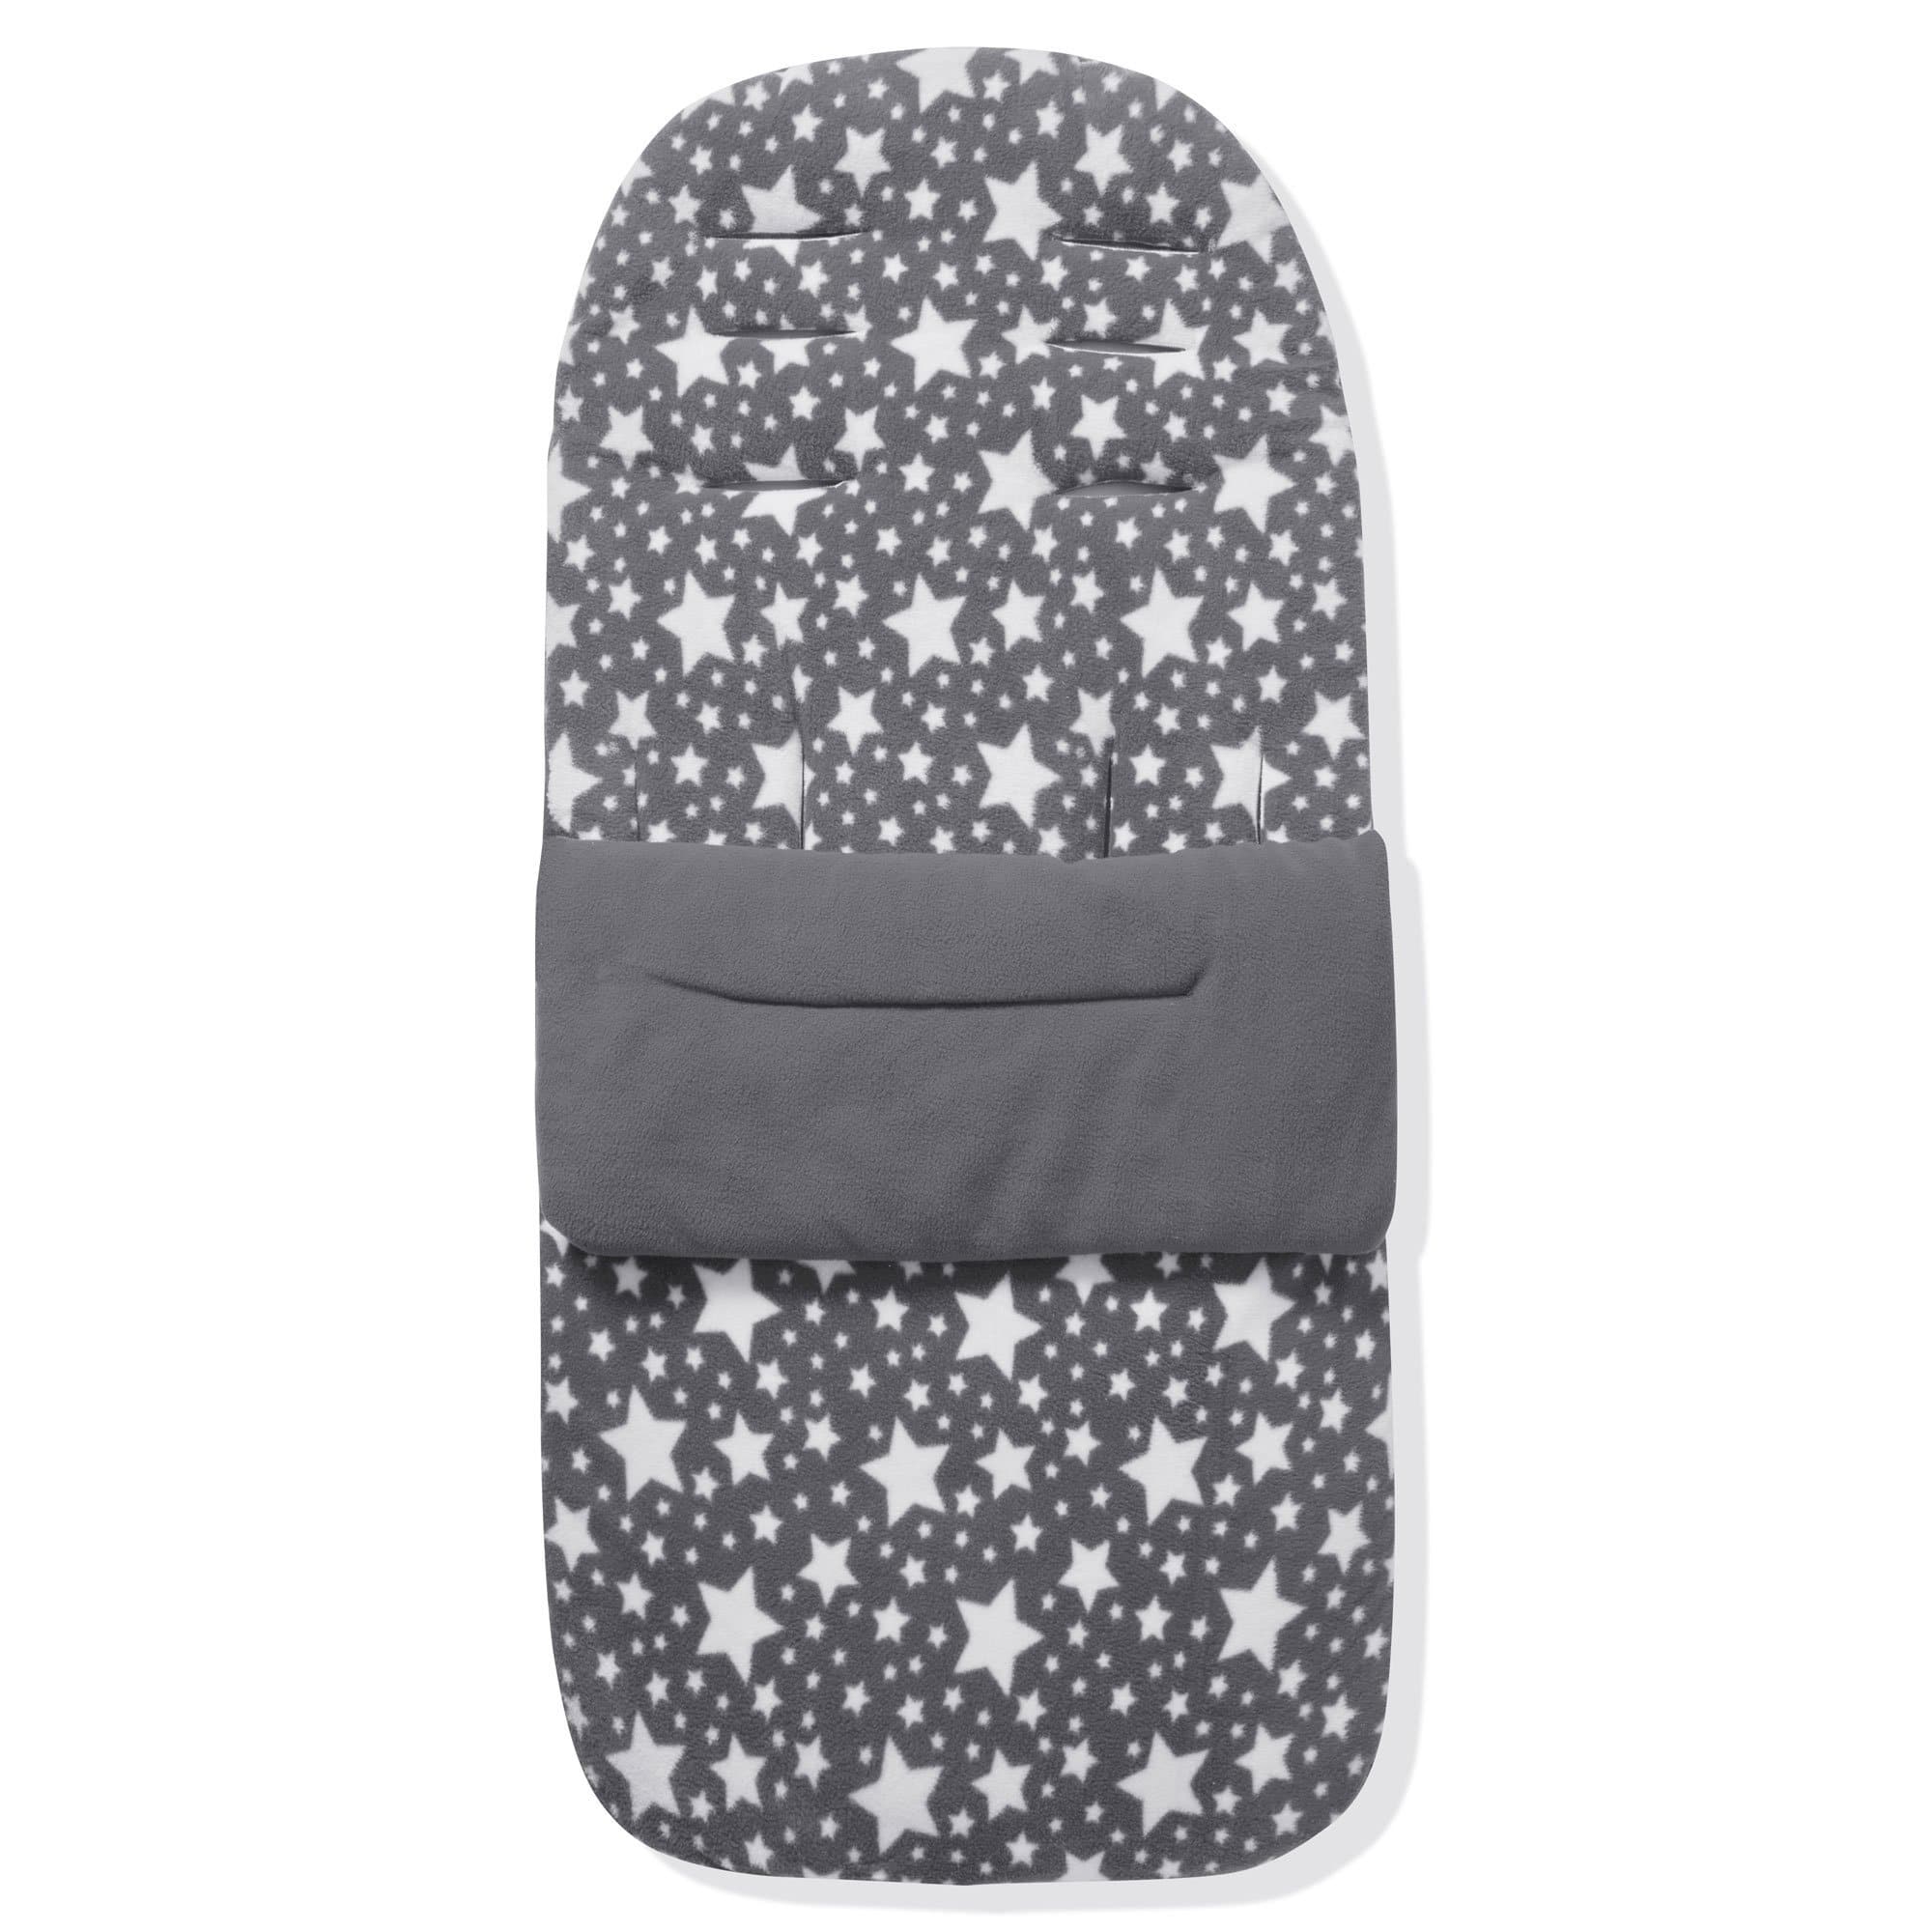 Fleece Footmuff / Cosy Toes Compatible with Safety 1st - Grey Star / Fits All Models | For Your Little One